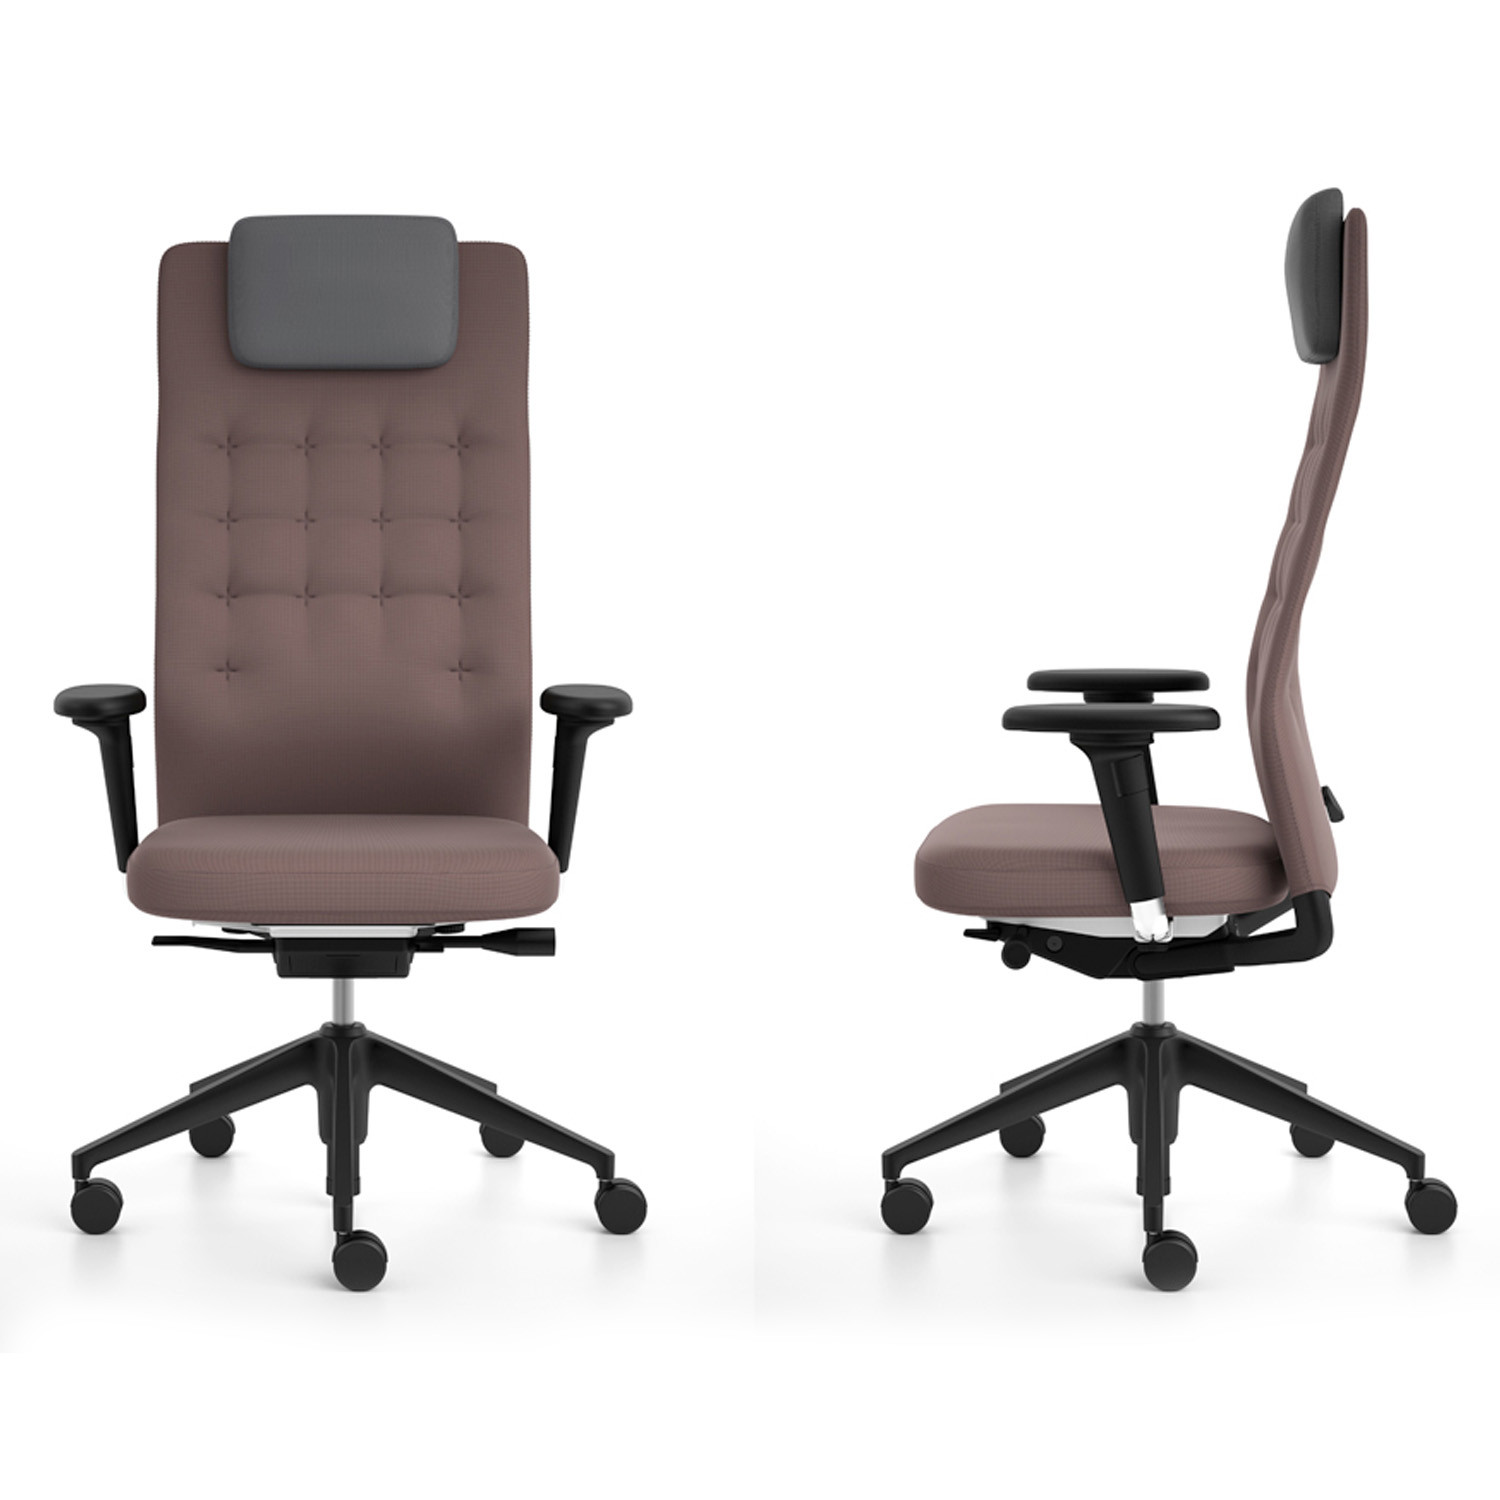 ID Trim L Executive Office Chairs